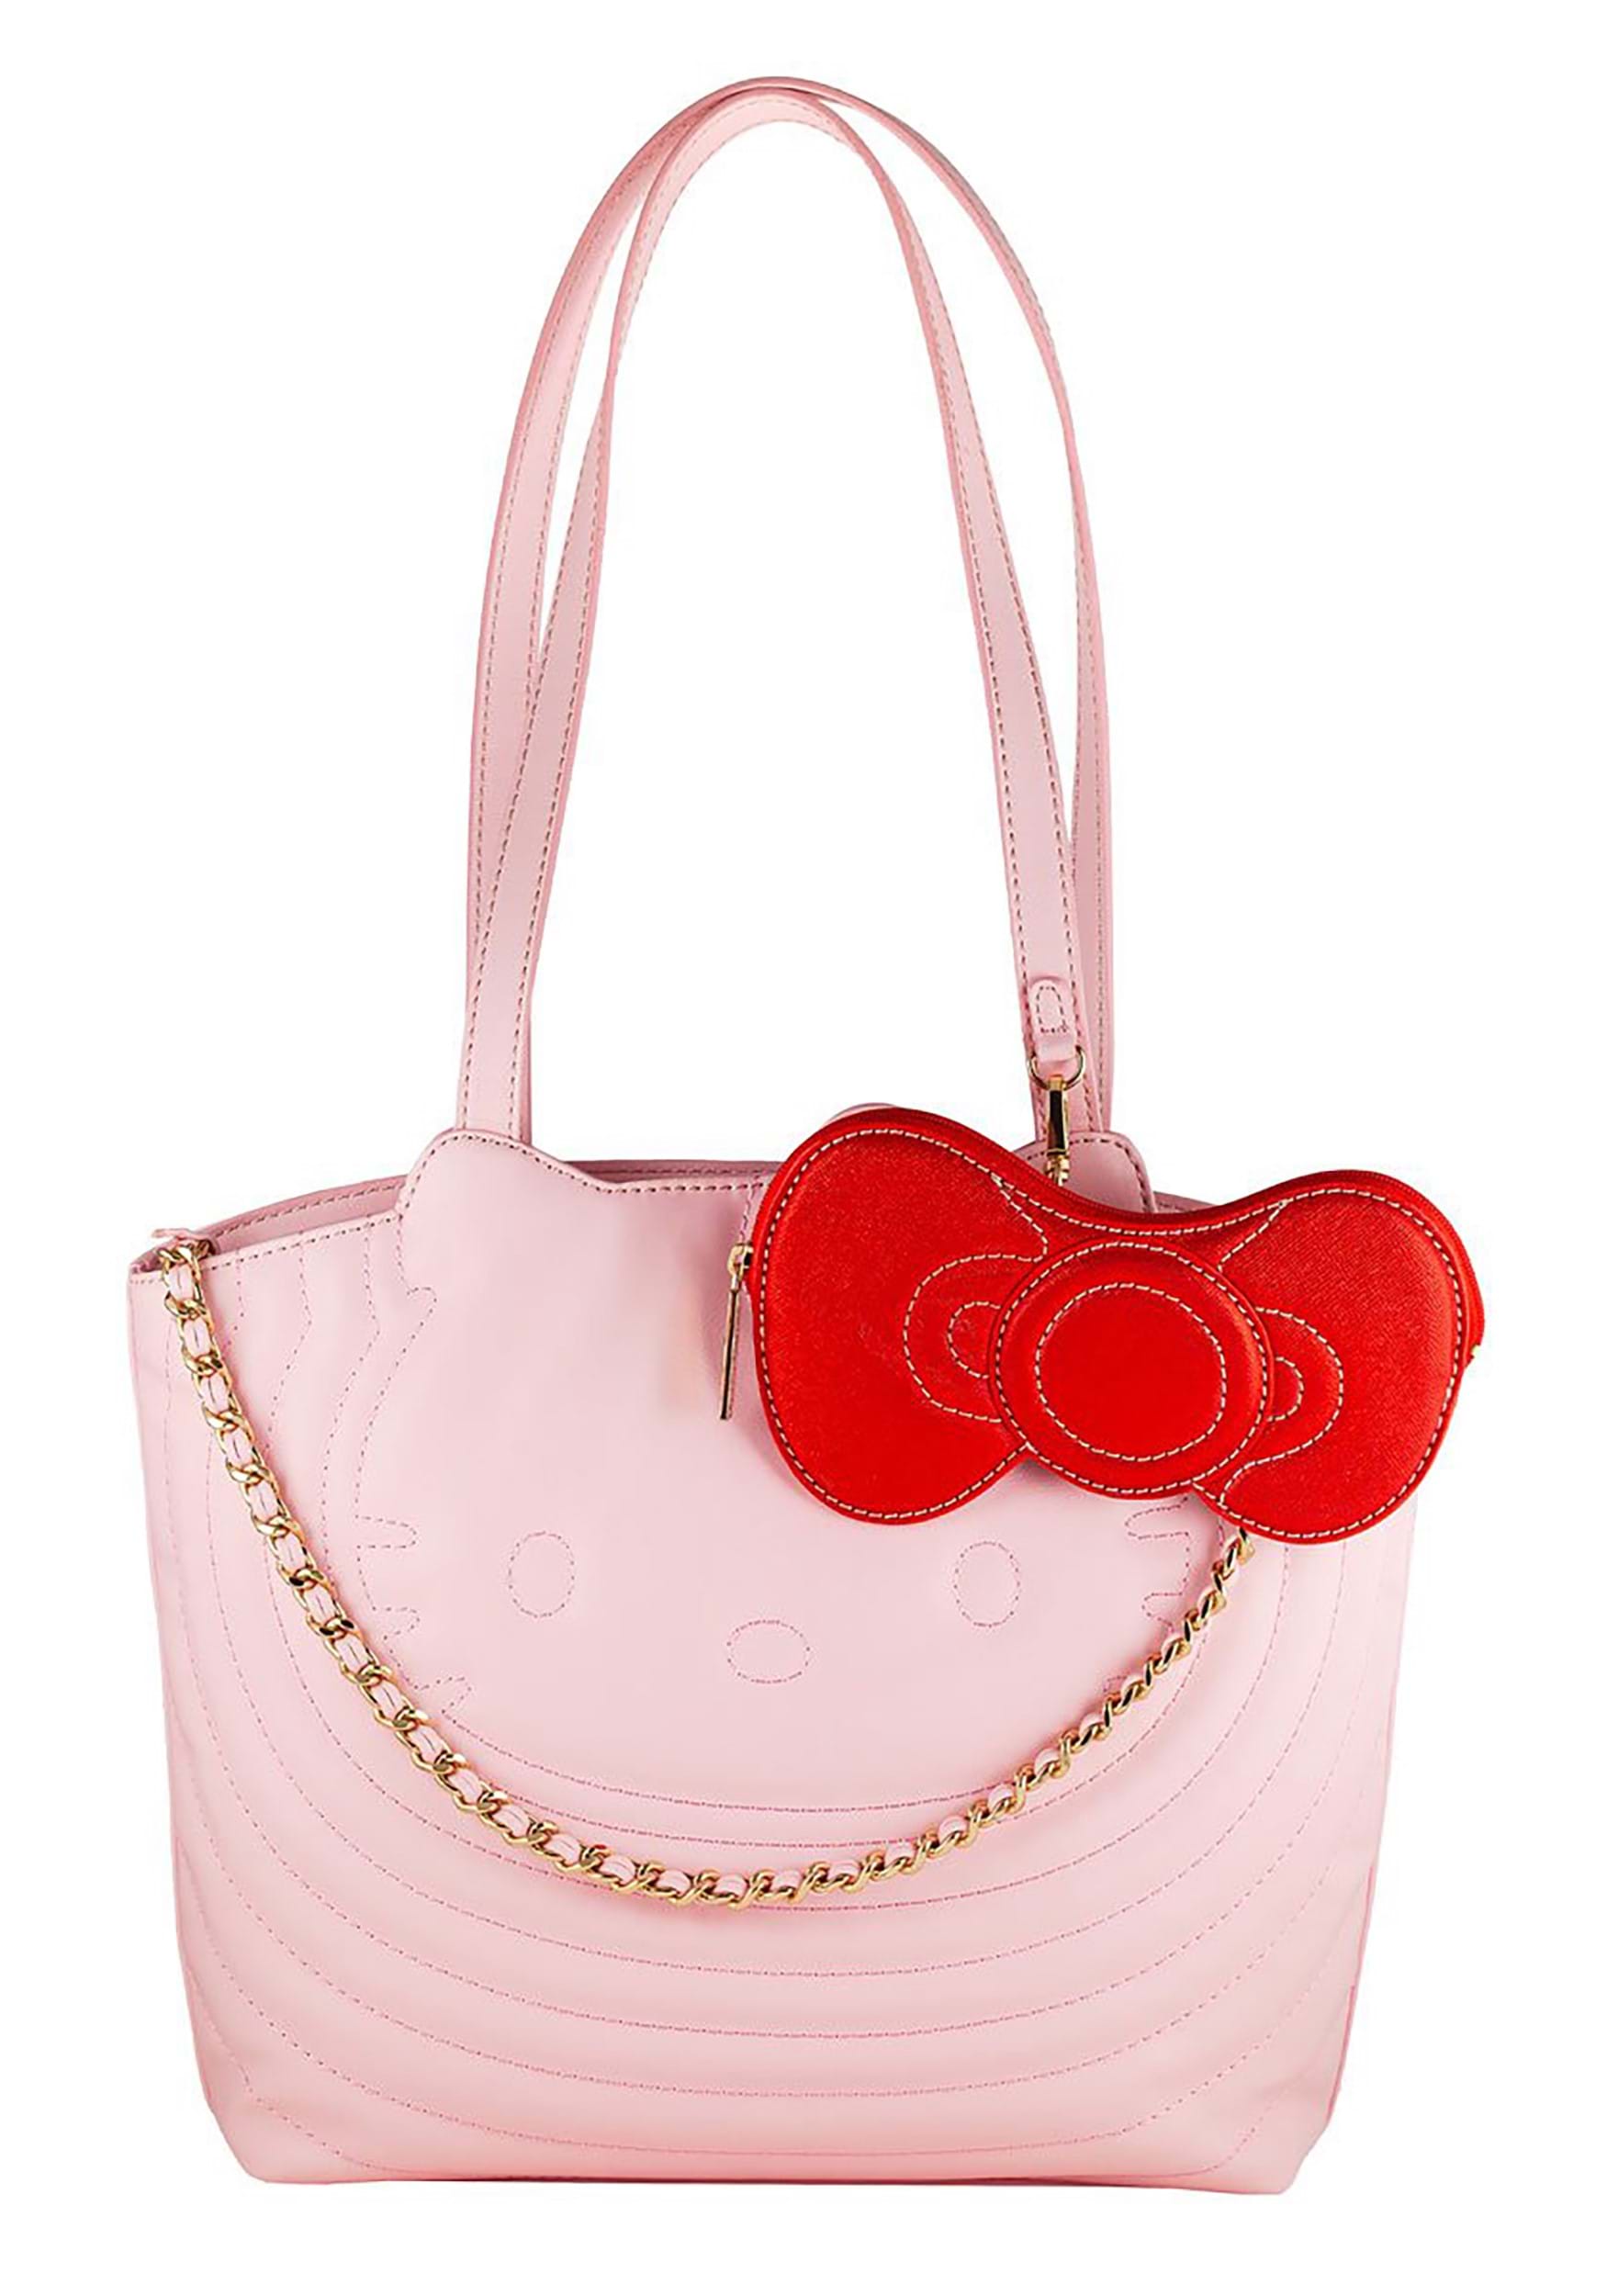 Danielle Nicole Hello Kitty Quilted Pink Shoulder Bag